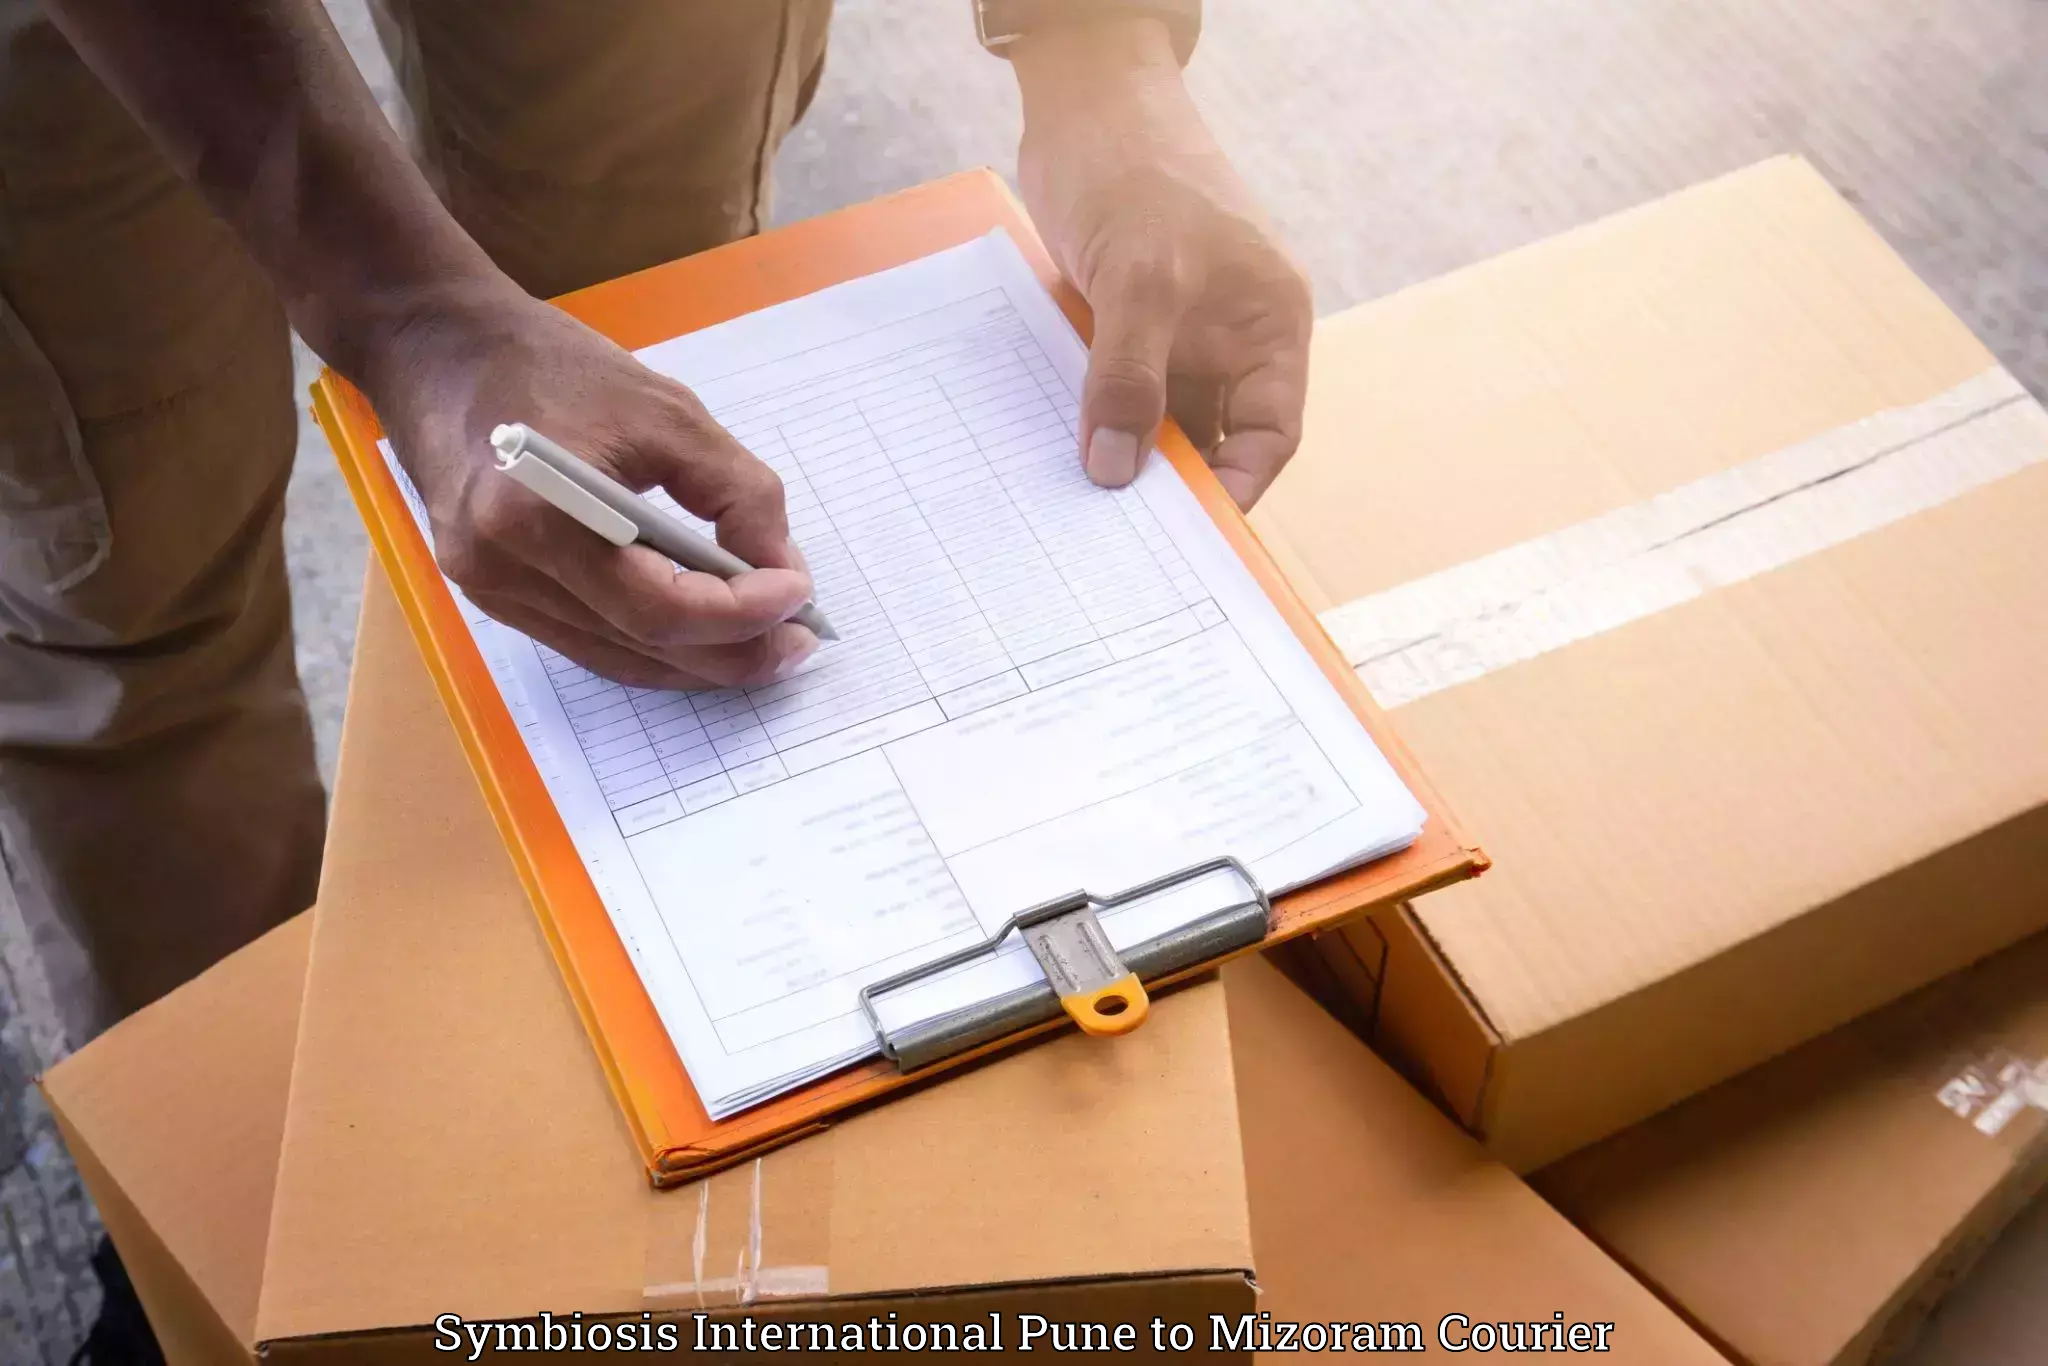 Personalized furniture moving in Symbiosis International Pune to Siaha